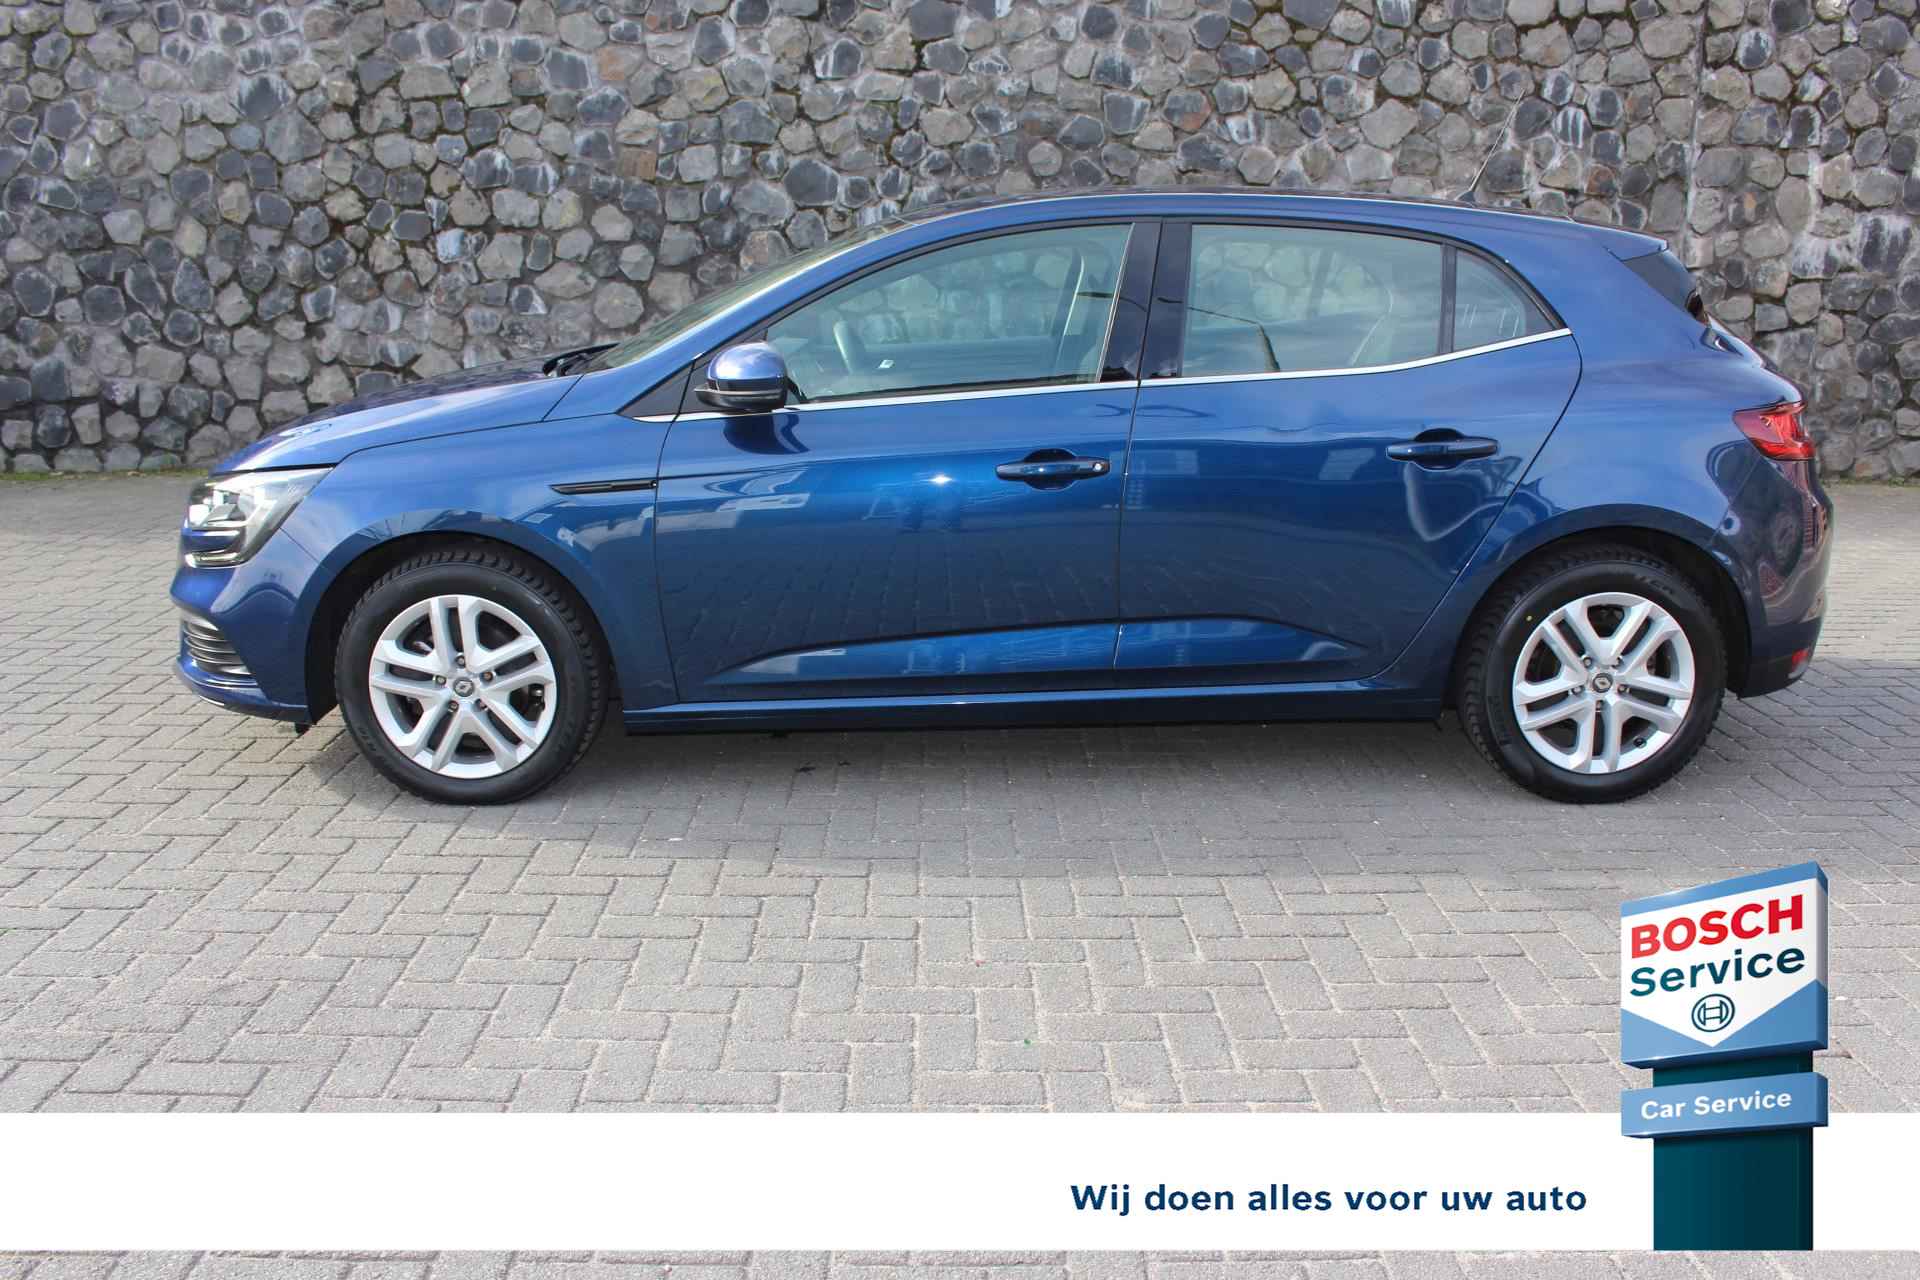 Renault Mégane 1.3 TCe Zen Dab+ audio Climate + cruise control Navi PDC achter Led verlichting voor + achter - 30/34